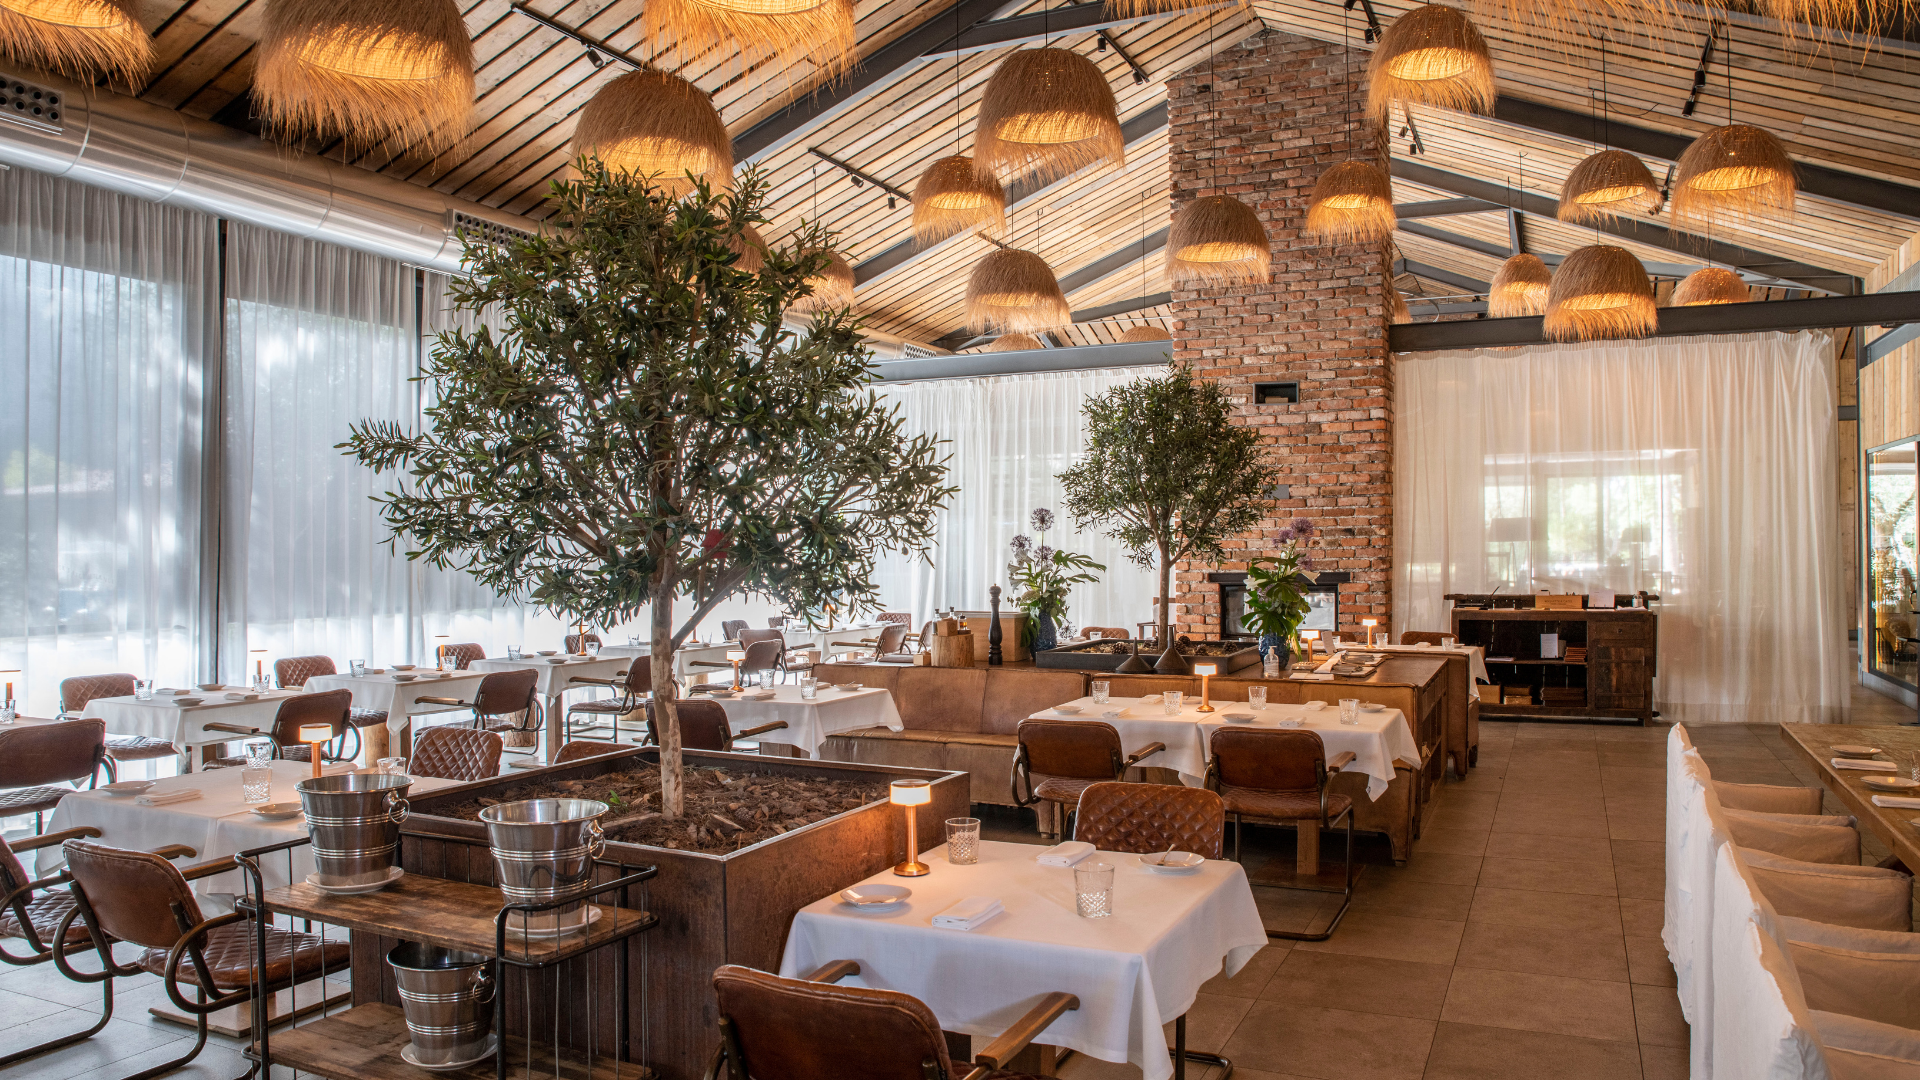 15 of the best restaurants in Portugal to visit (2)